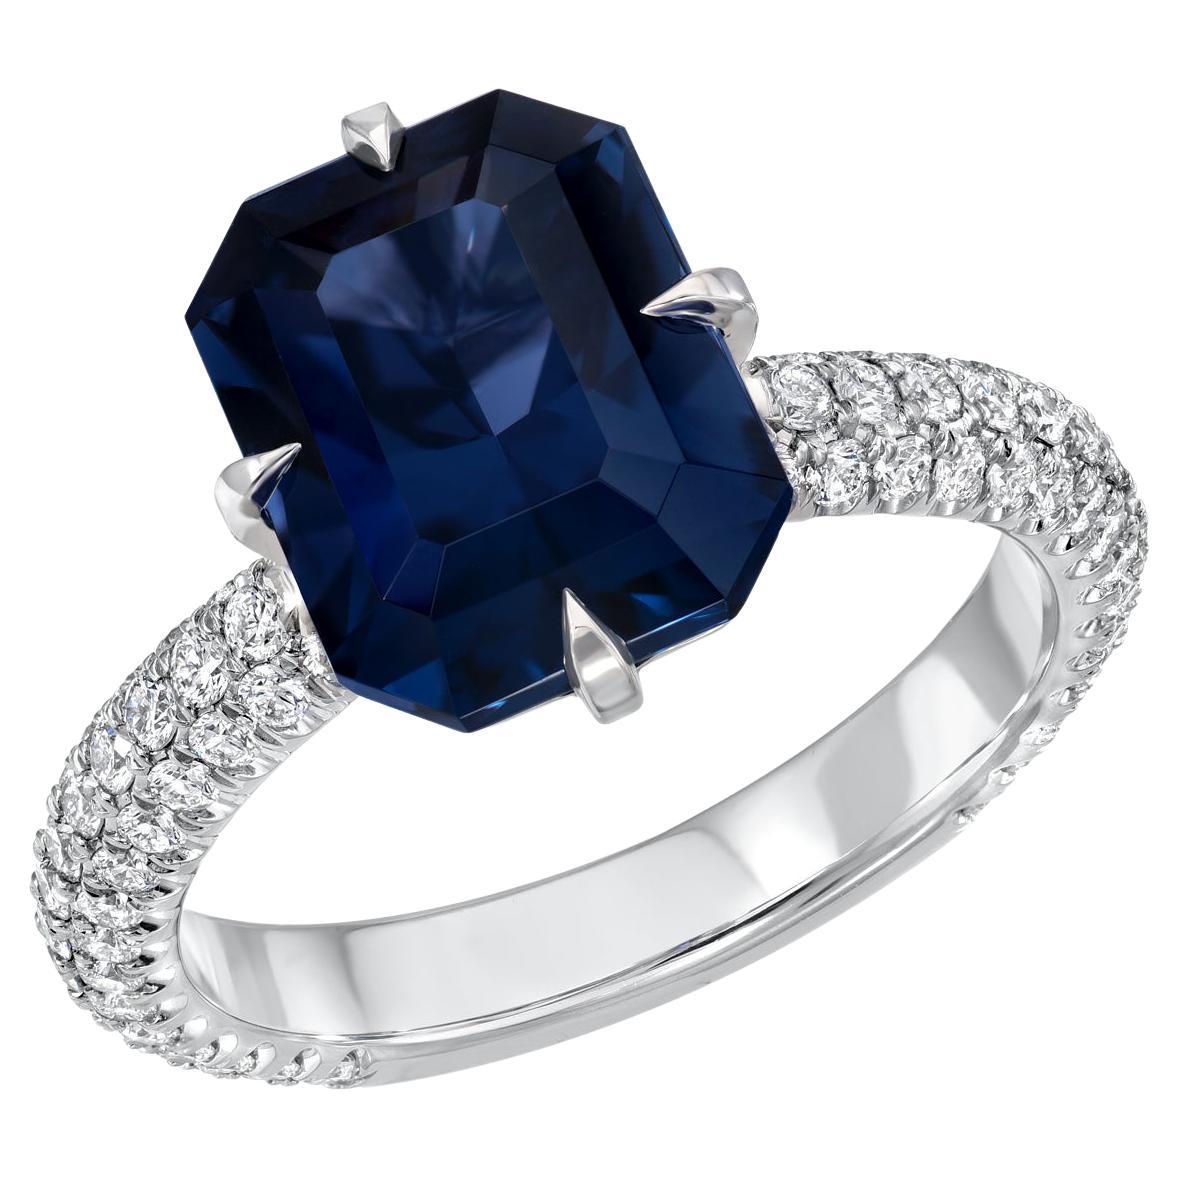 Rare and exquisite 4.01 carat deep blue Spinel emerald cut, nestled in a remarkable three row, 0.80 carat, micro-set diamond ring in platinum.
Ring size 6. Resizing is complementary upon request.
Crafted by extremely skilled hands in the